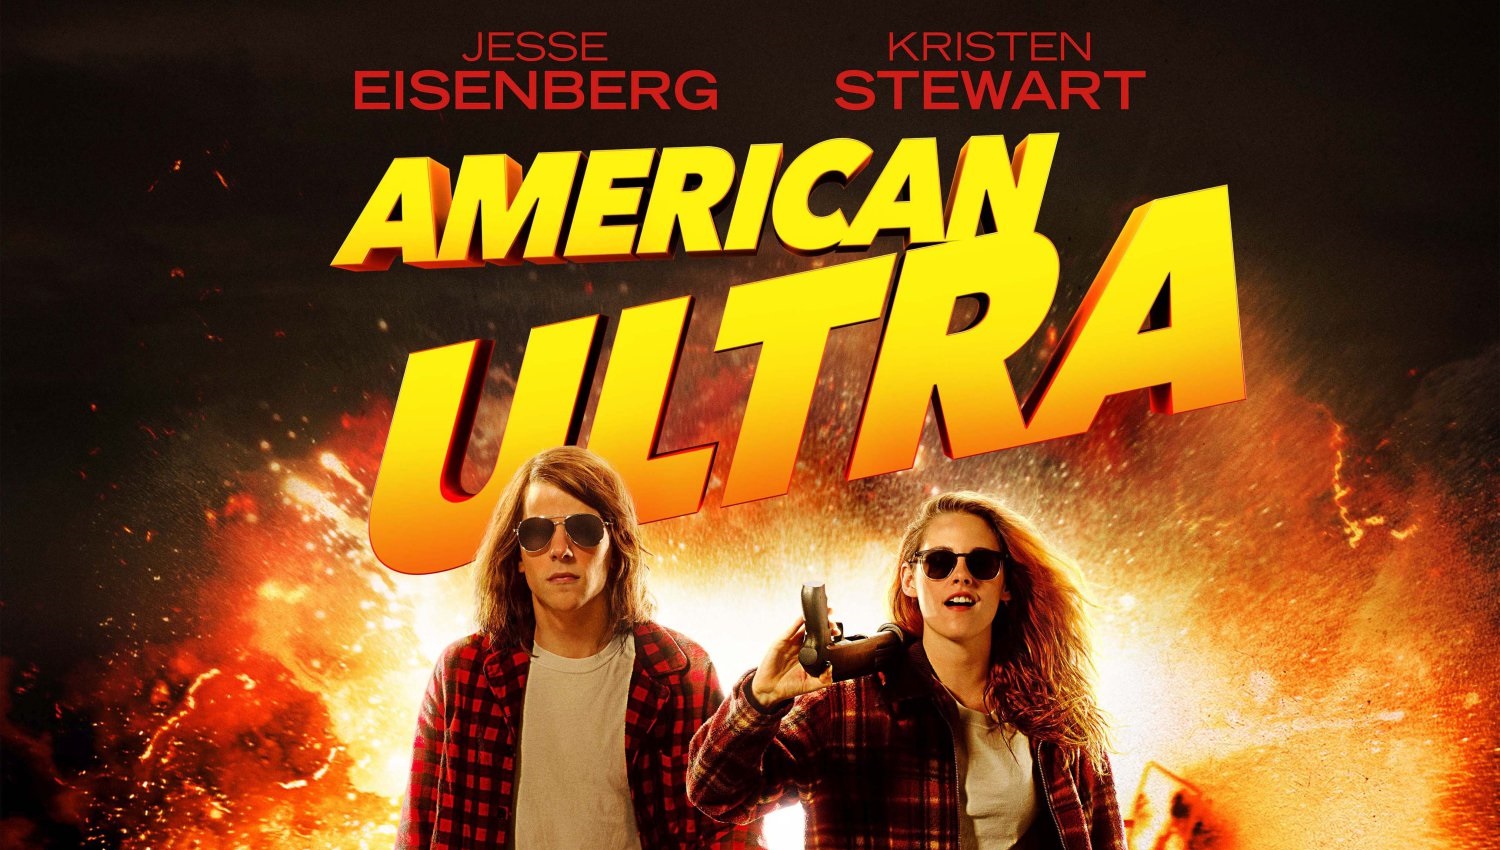 Movie Review: “American Ultra”